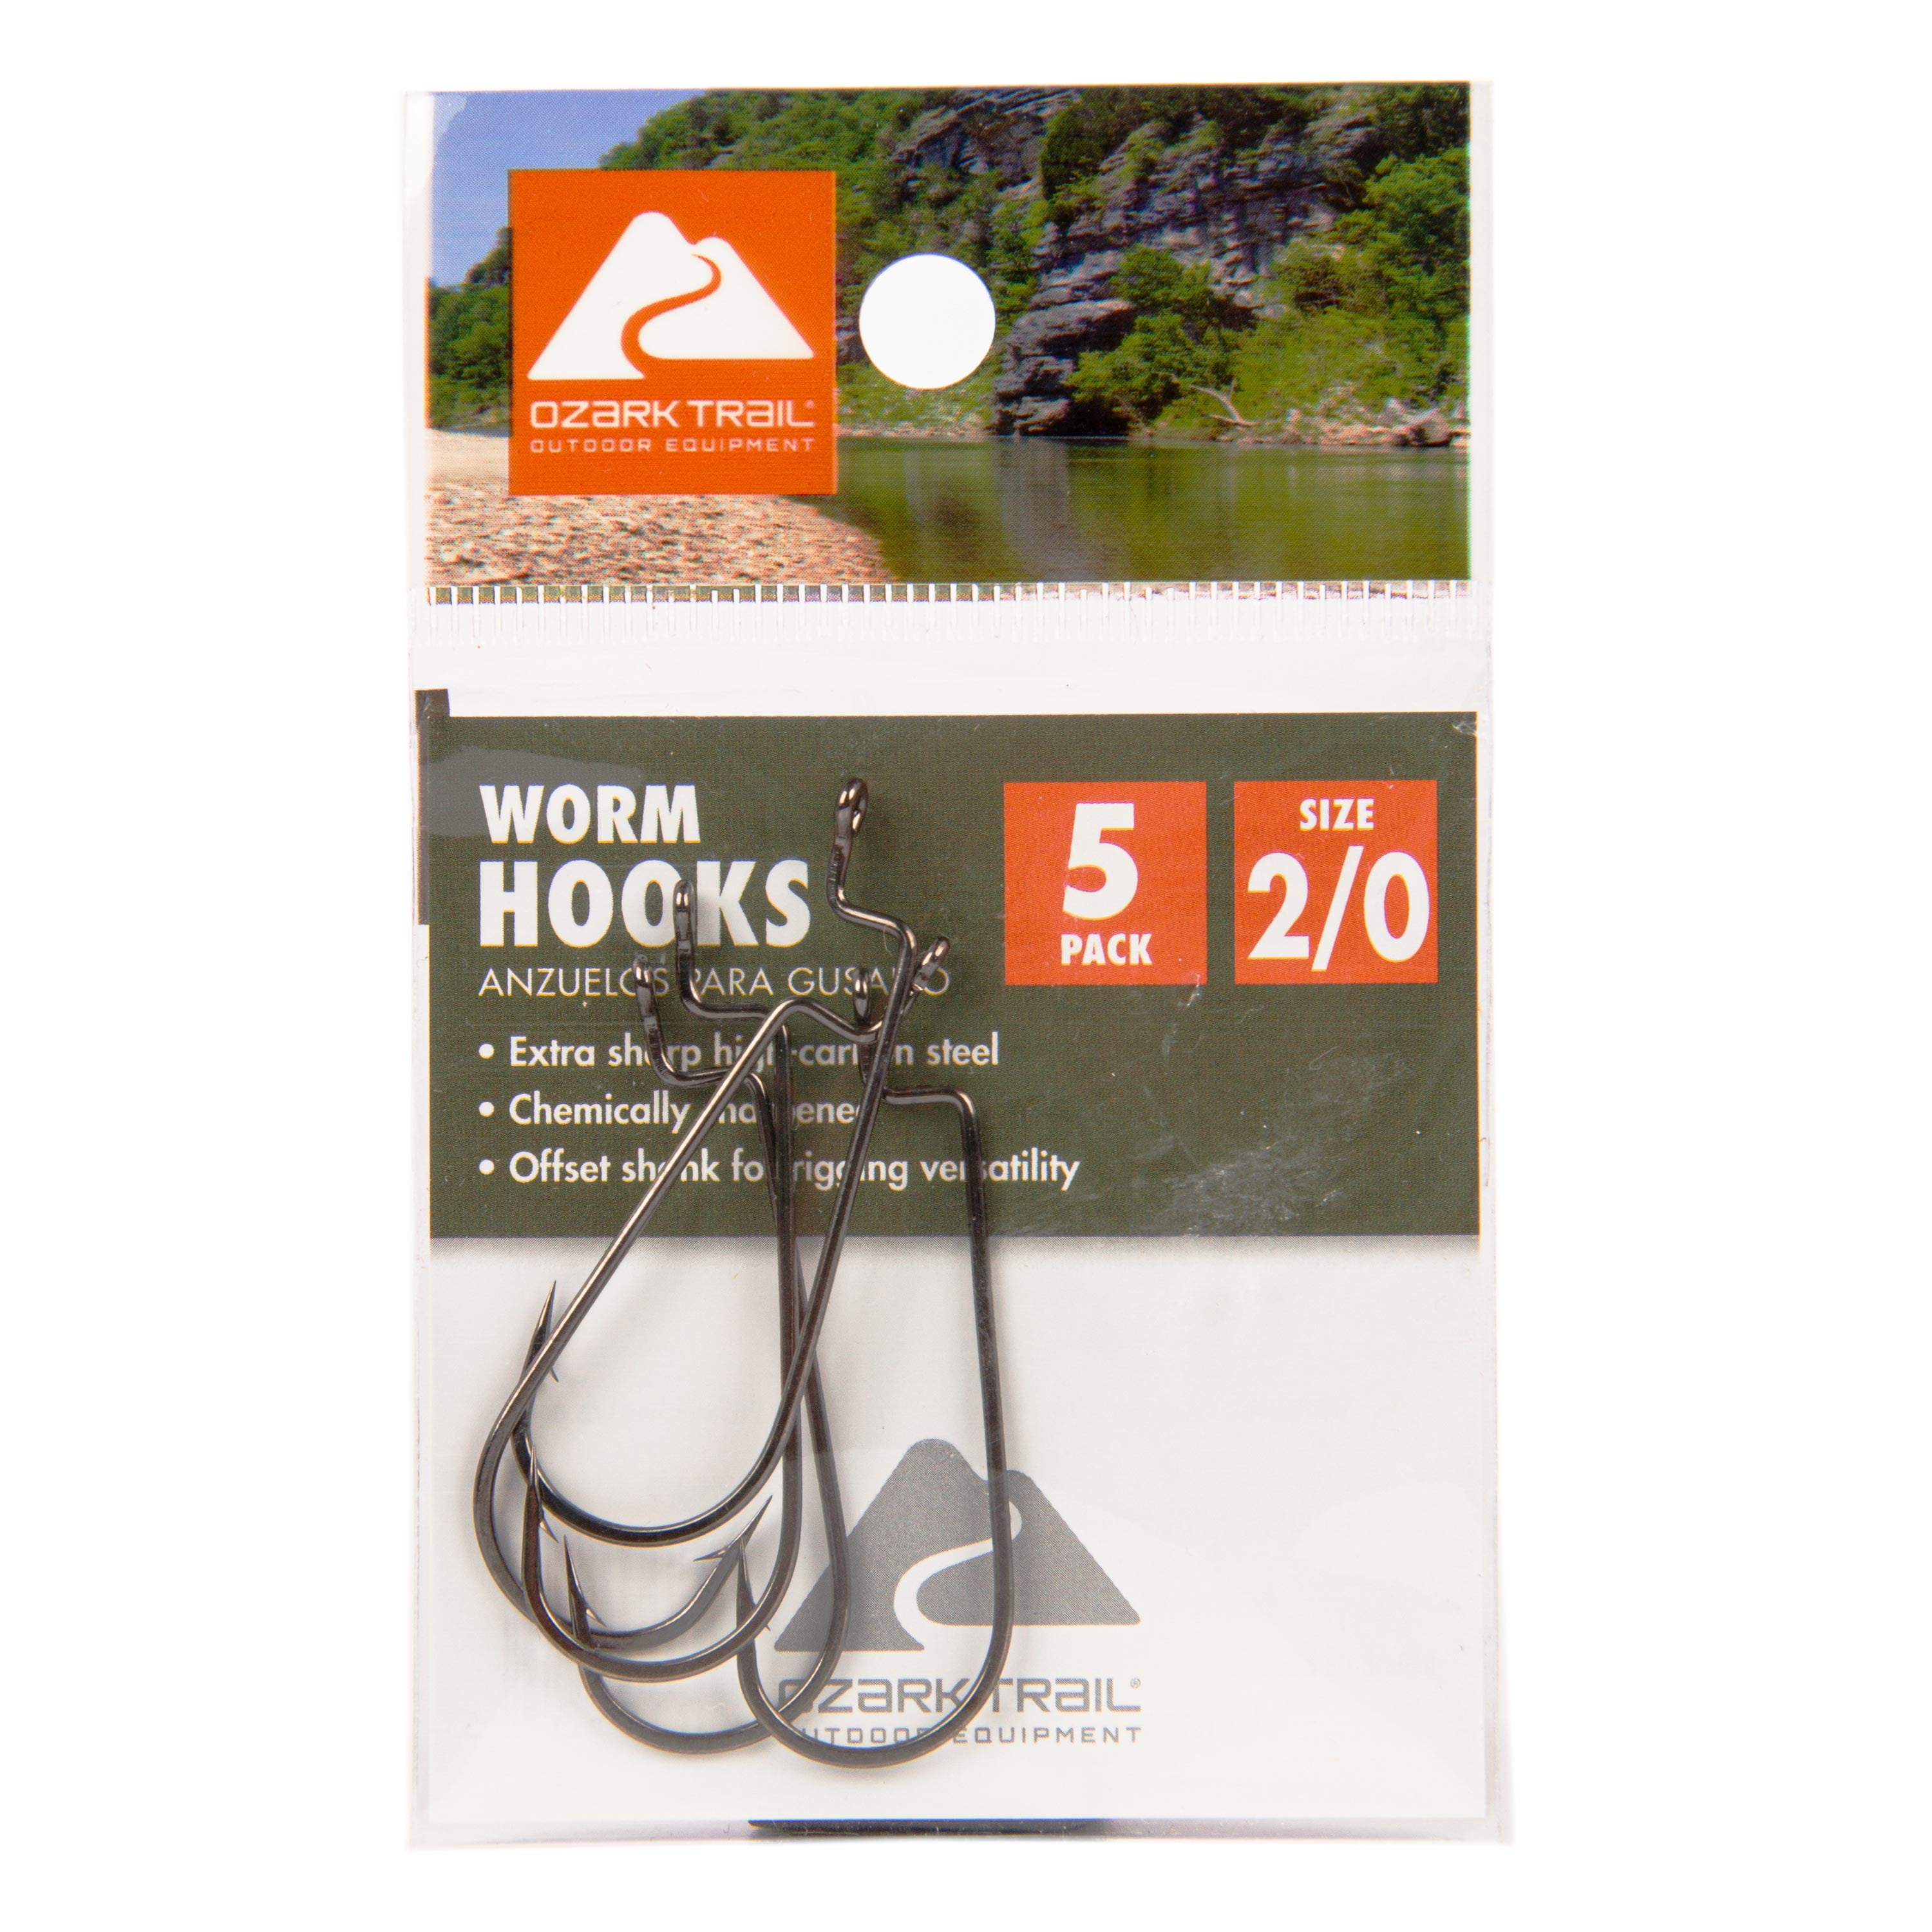 Owner Hooks Red Mosquito Light Wire Hook Size 2/0 6 Pack 5177-123 